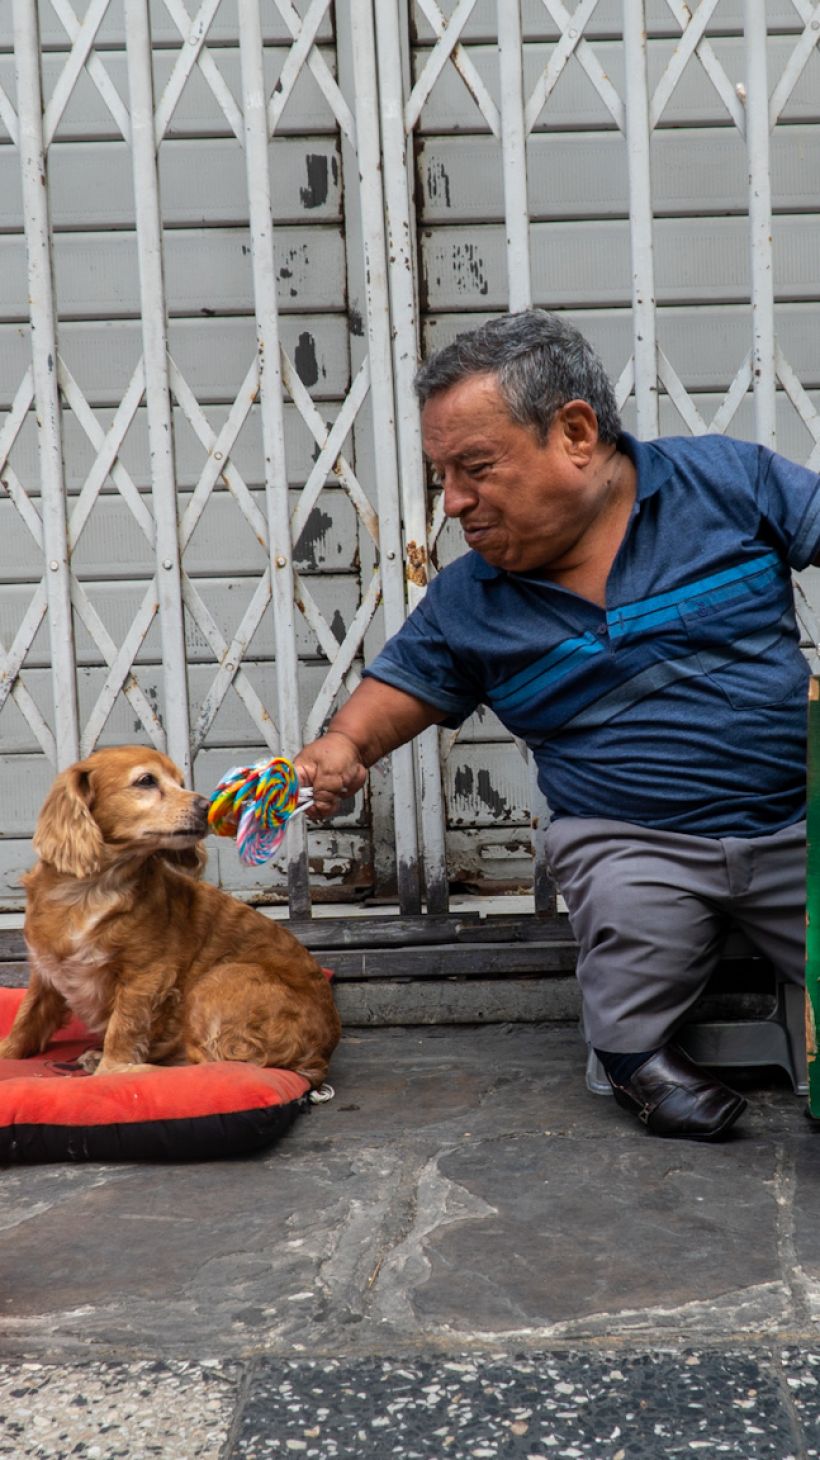 A street vendor in Peru, with his dog